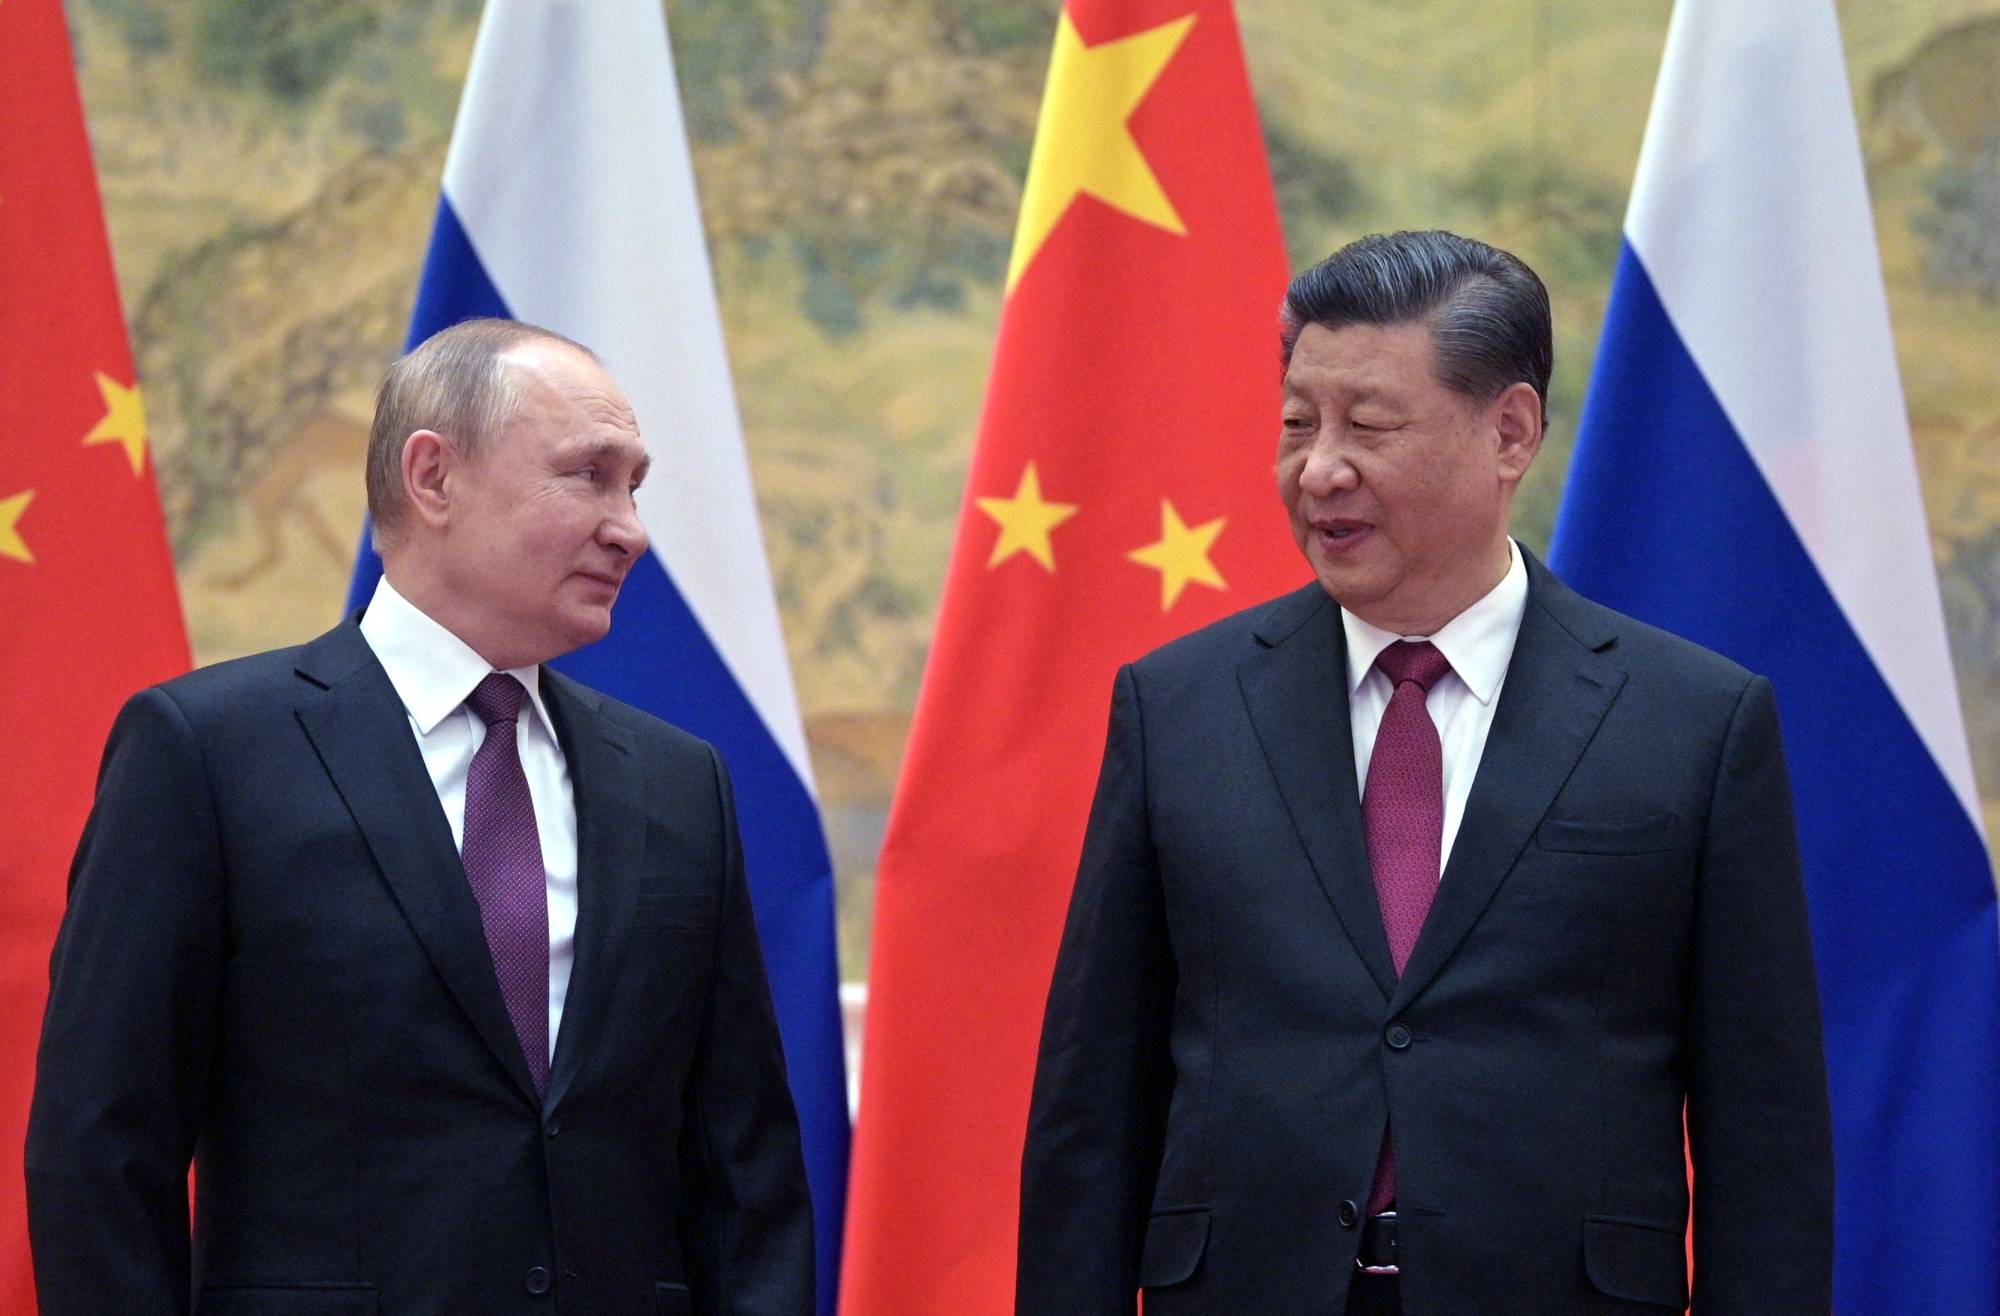 China provides geospatial intel and other military support to Russia, US says